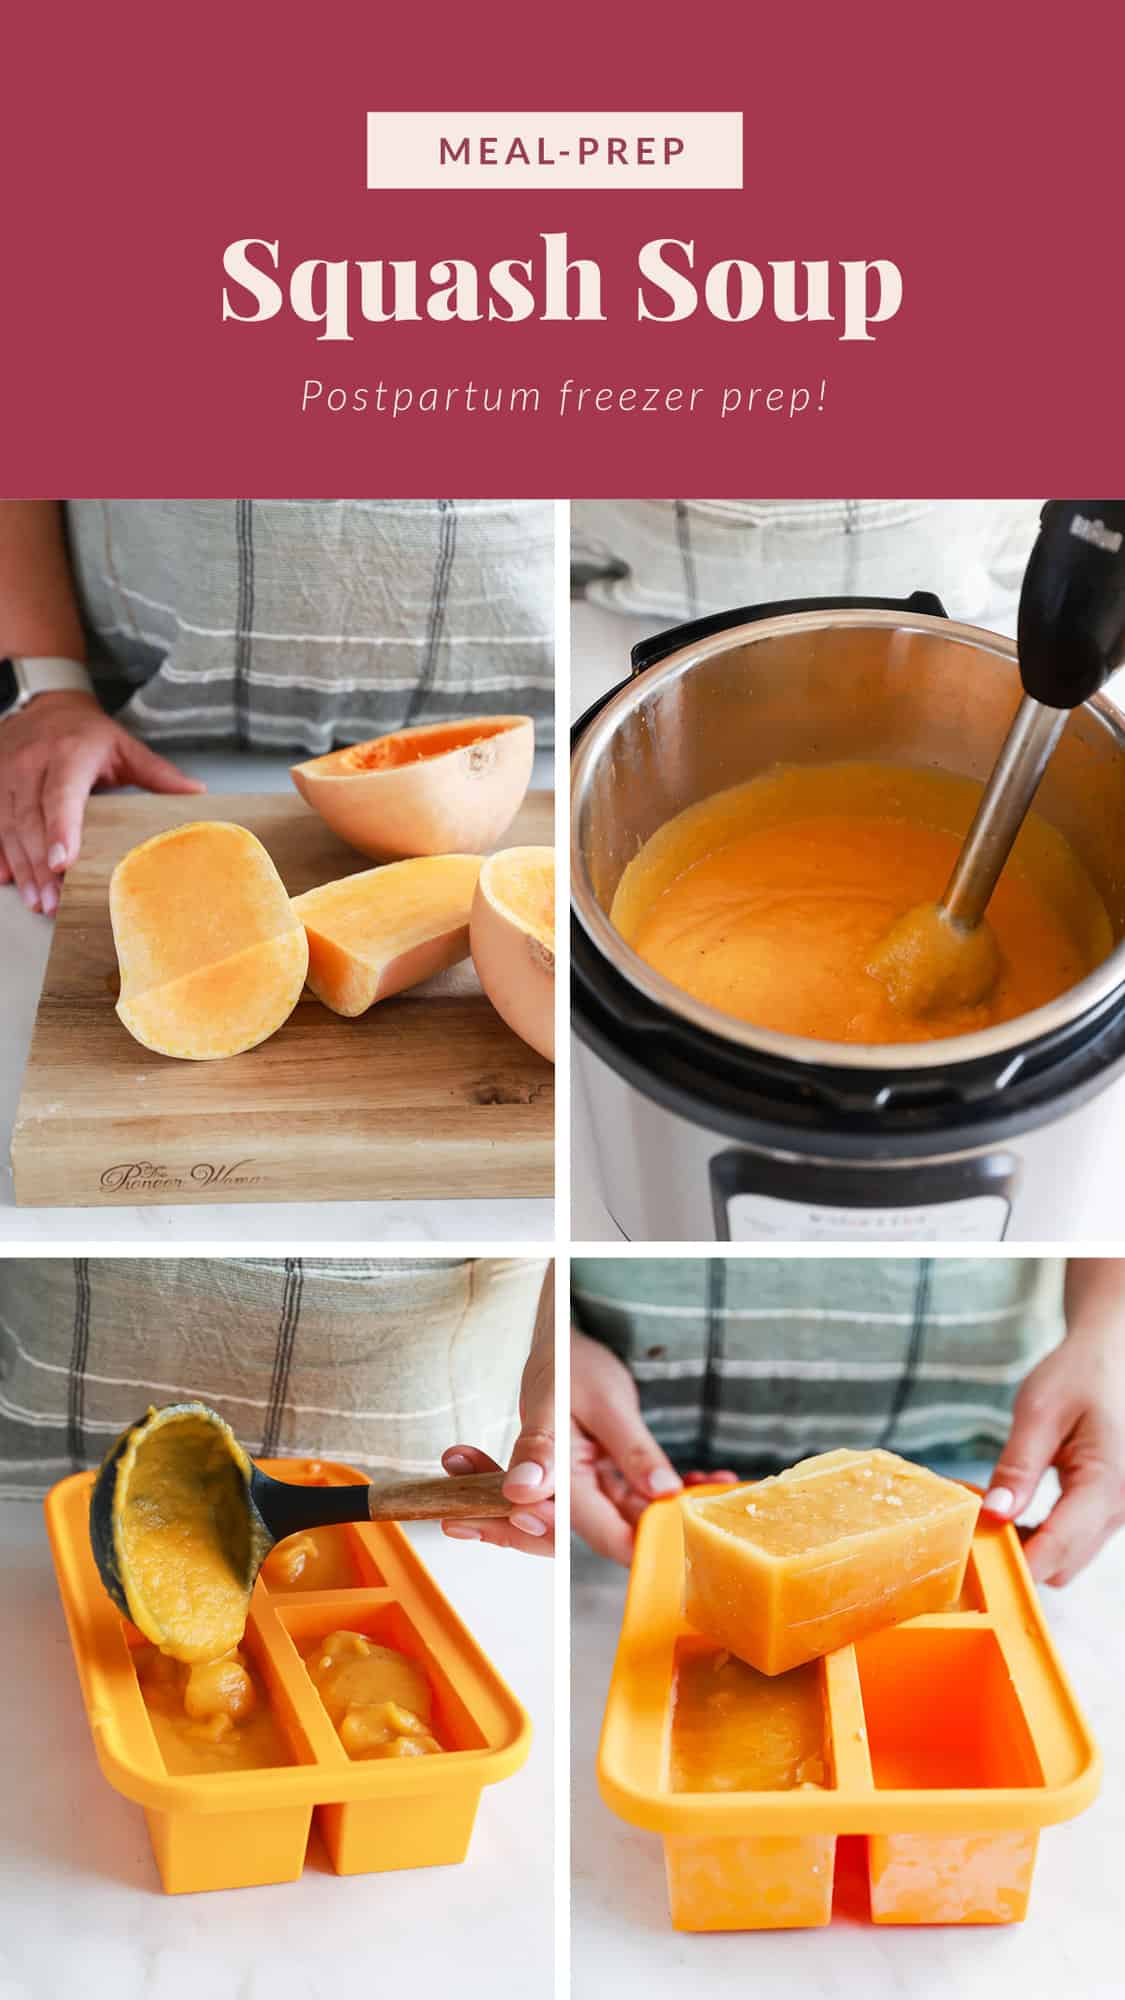 How to make squash soup in an instant pot.